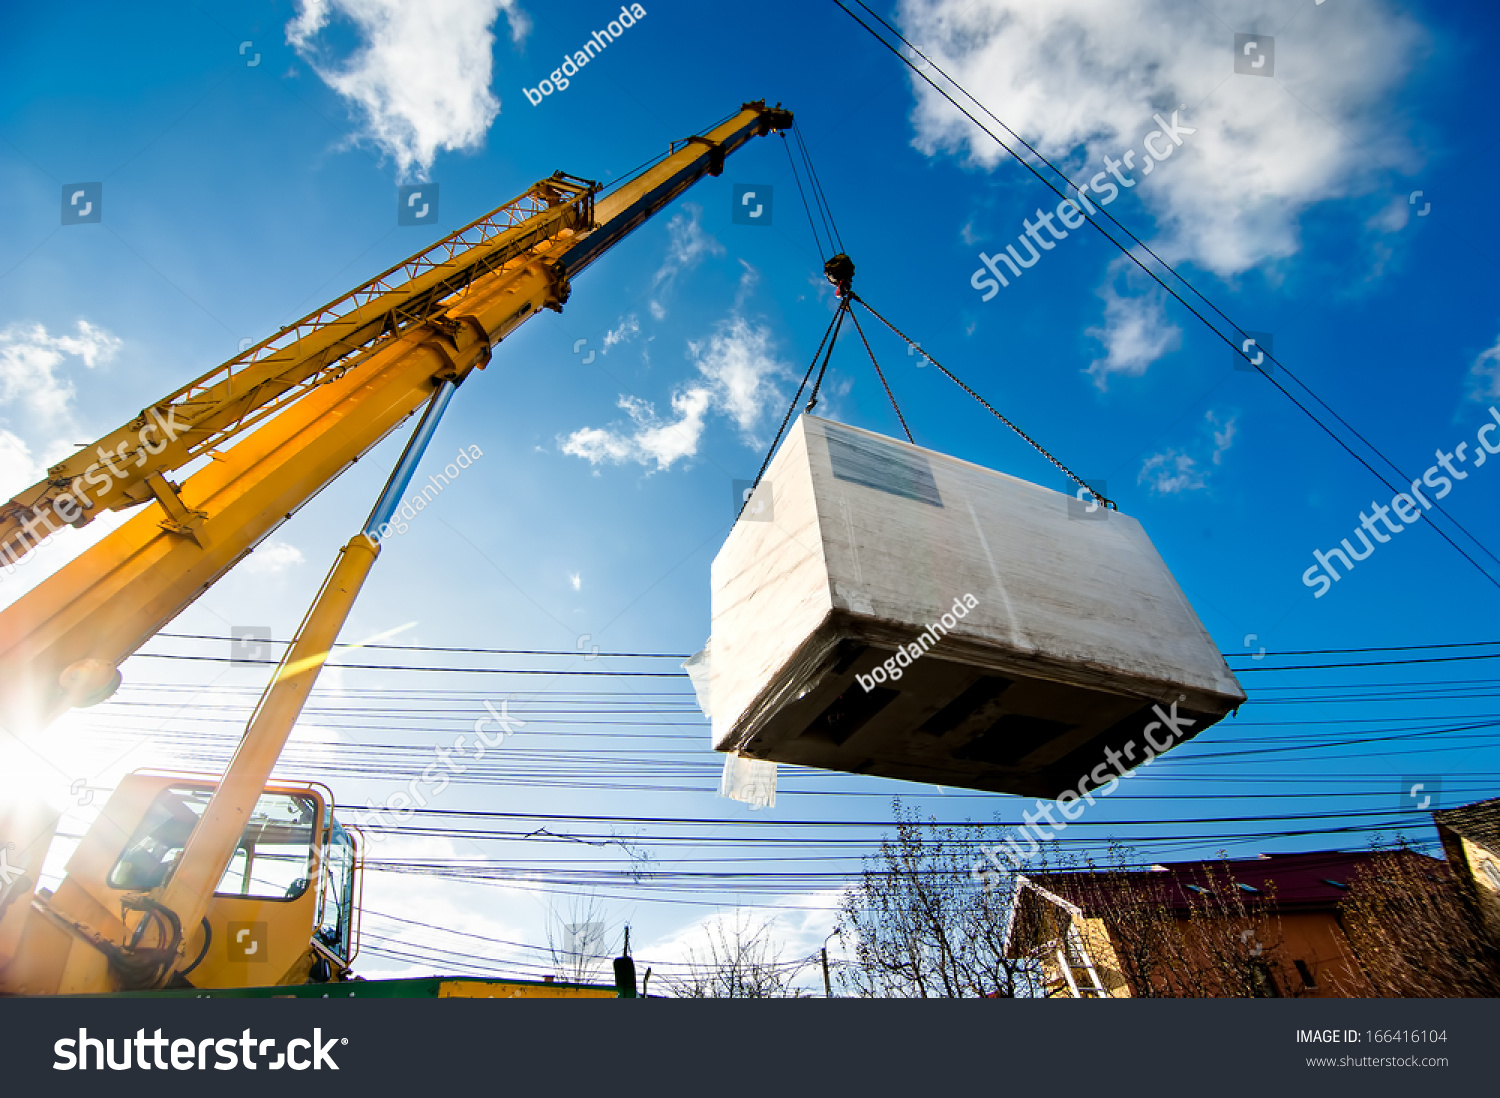 Industrial Crane operating and lifting an electric generator against sunlight and blue sky #166416104